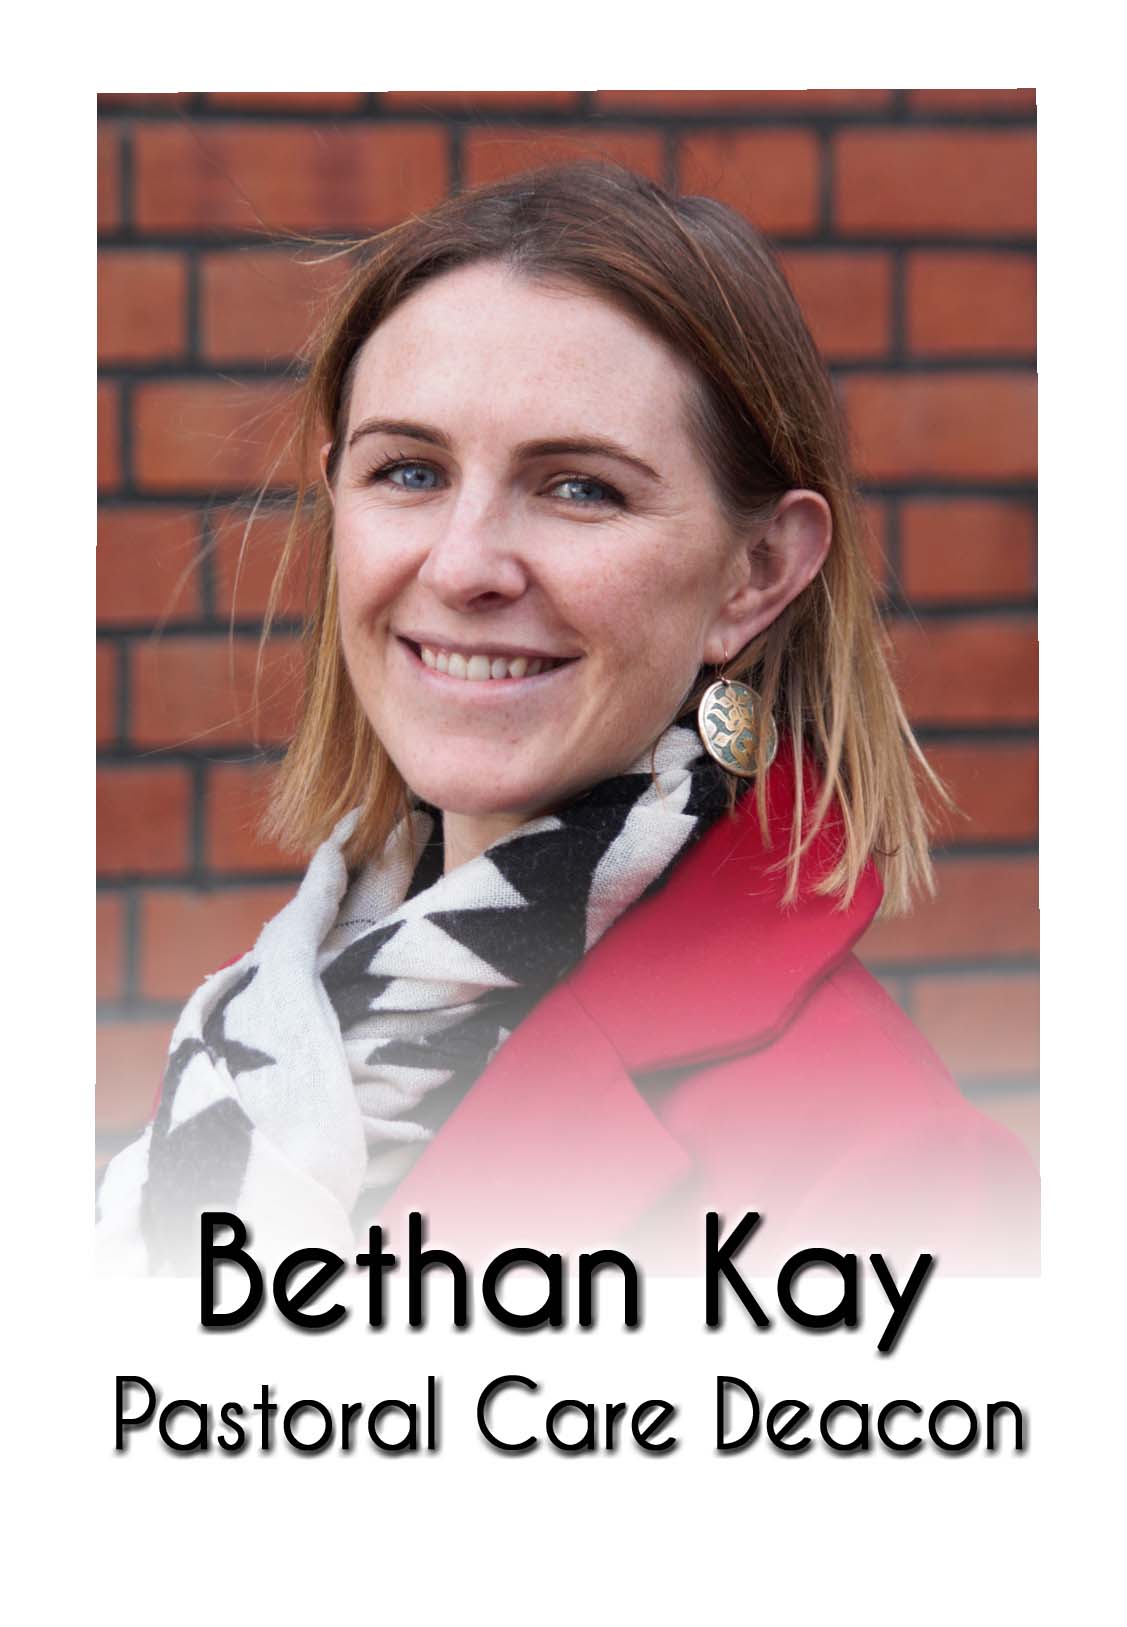 Bethan Kay labelled